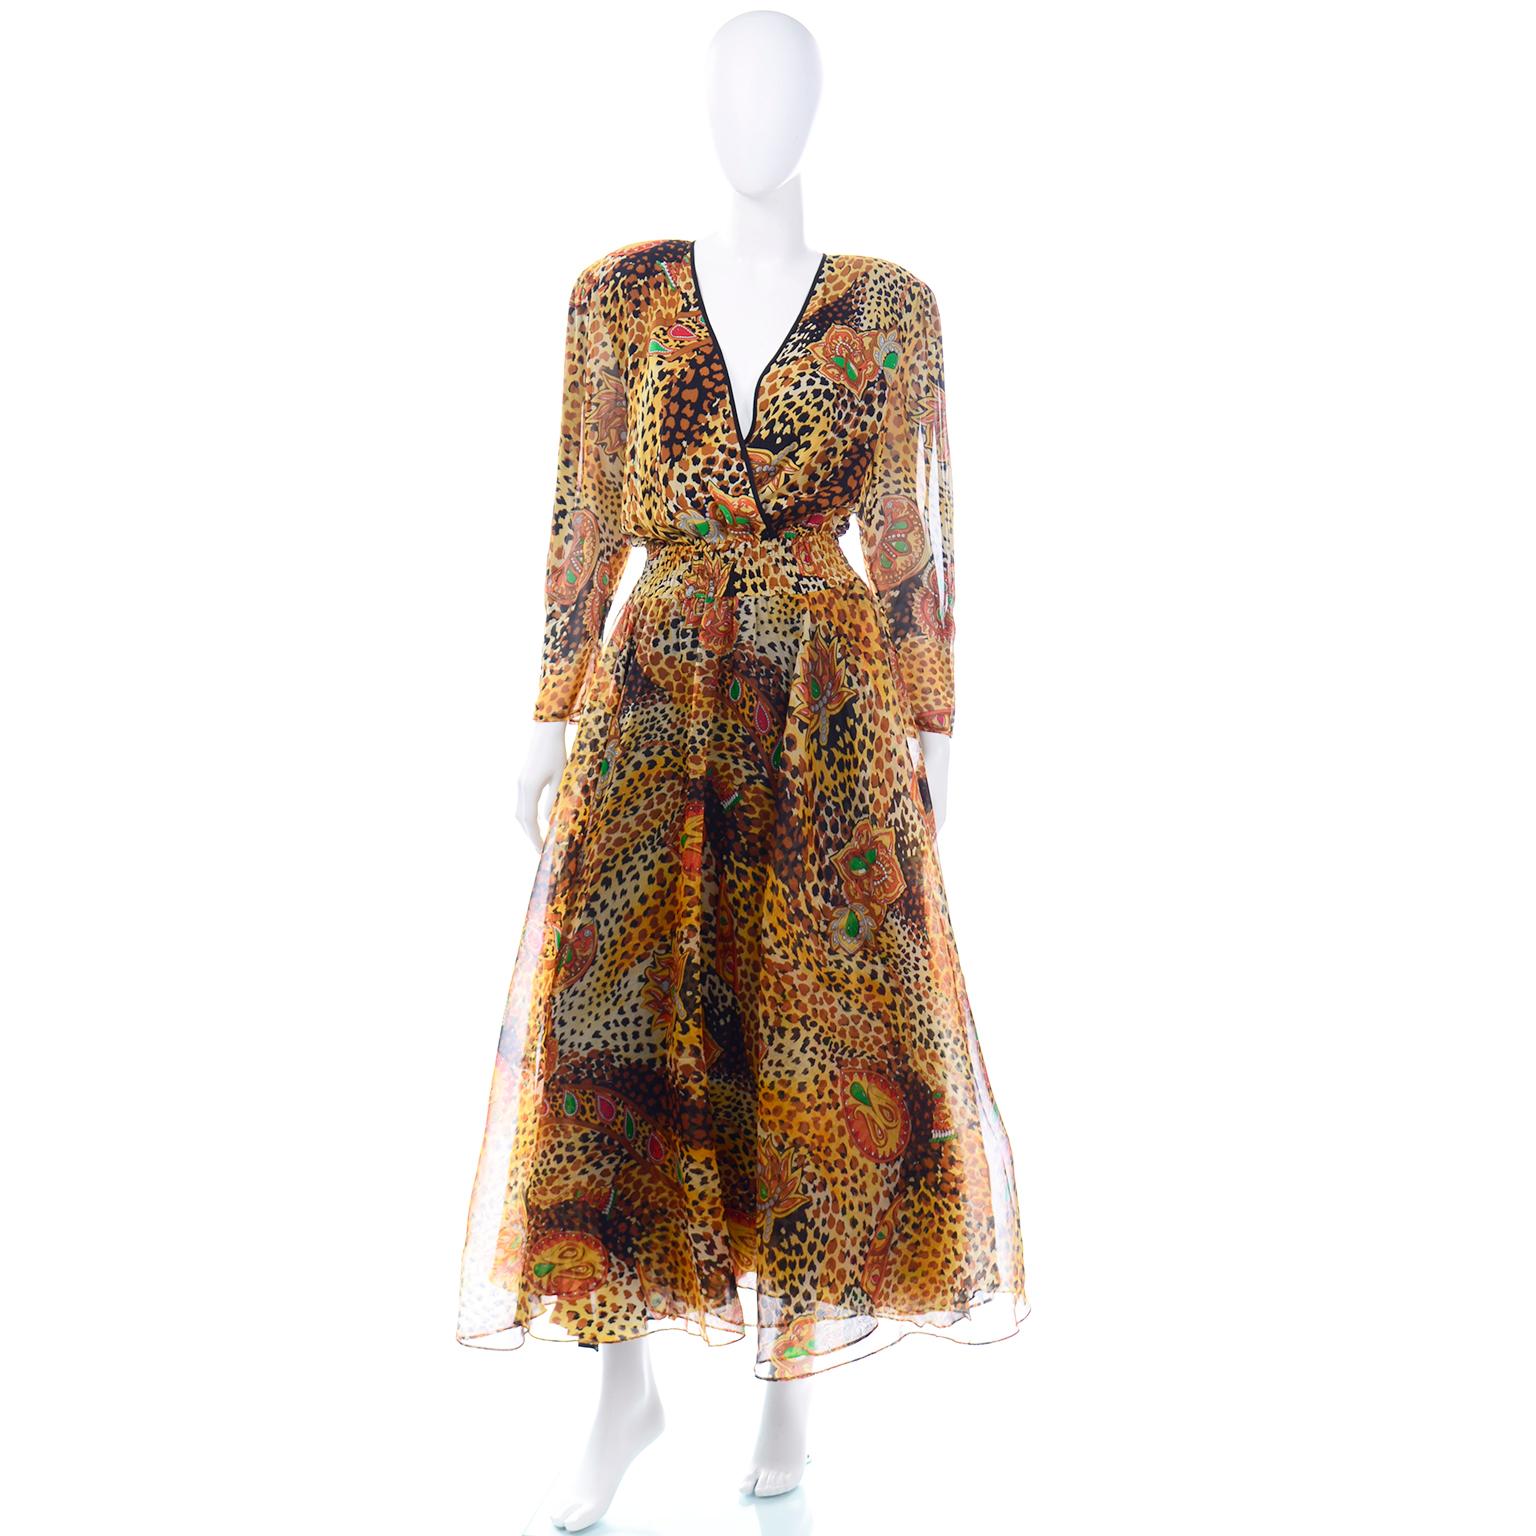 This beautiful vintage Diane Freis dress is made in a brown and black silk animal (cheetah or leopard) print with abstract jewels and leaves in shades of green, red, orange and yellow.  This stunning dress has a low v neckline, full circle skirt and